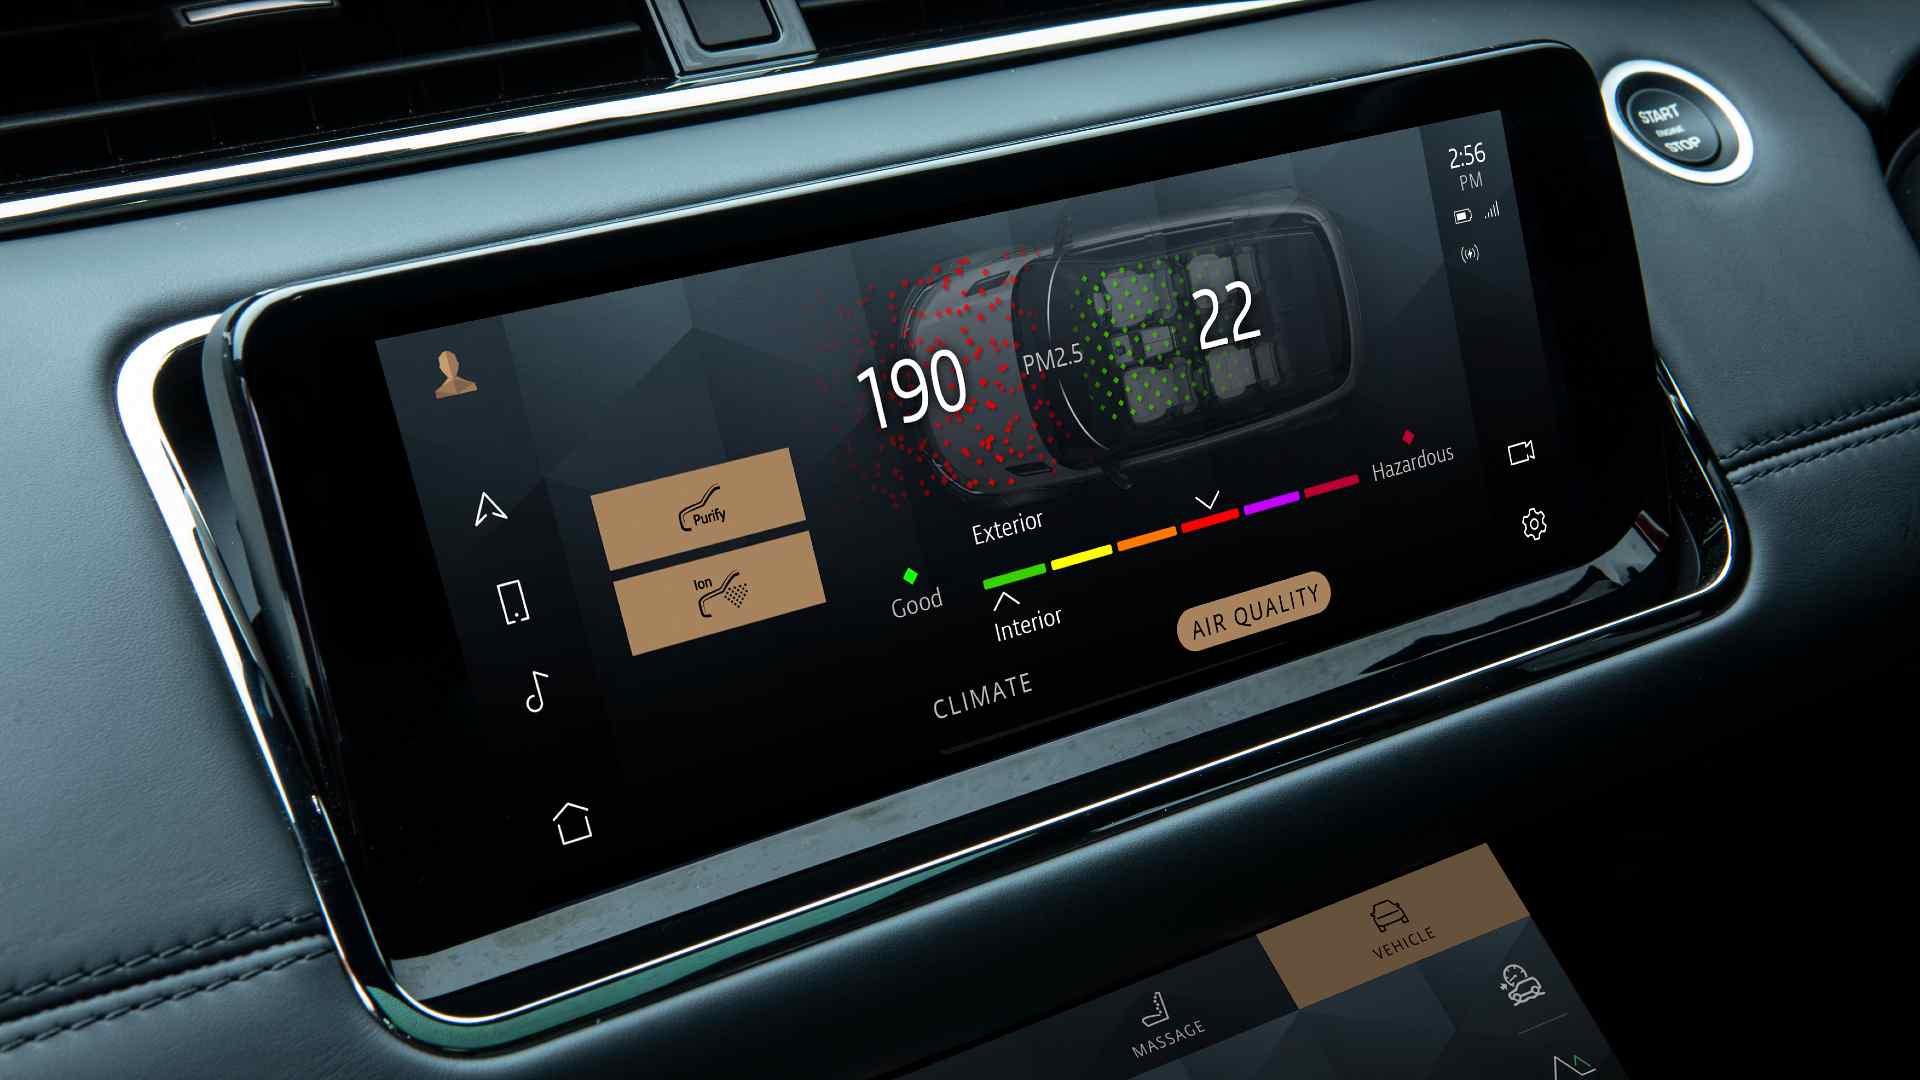 The ten-inch Pivi Pro infotainment system is new on the 2021 Range Rover Evoque. Image: Land Rover